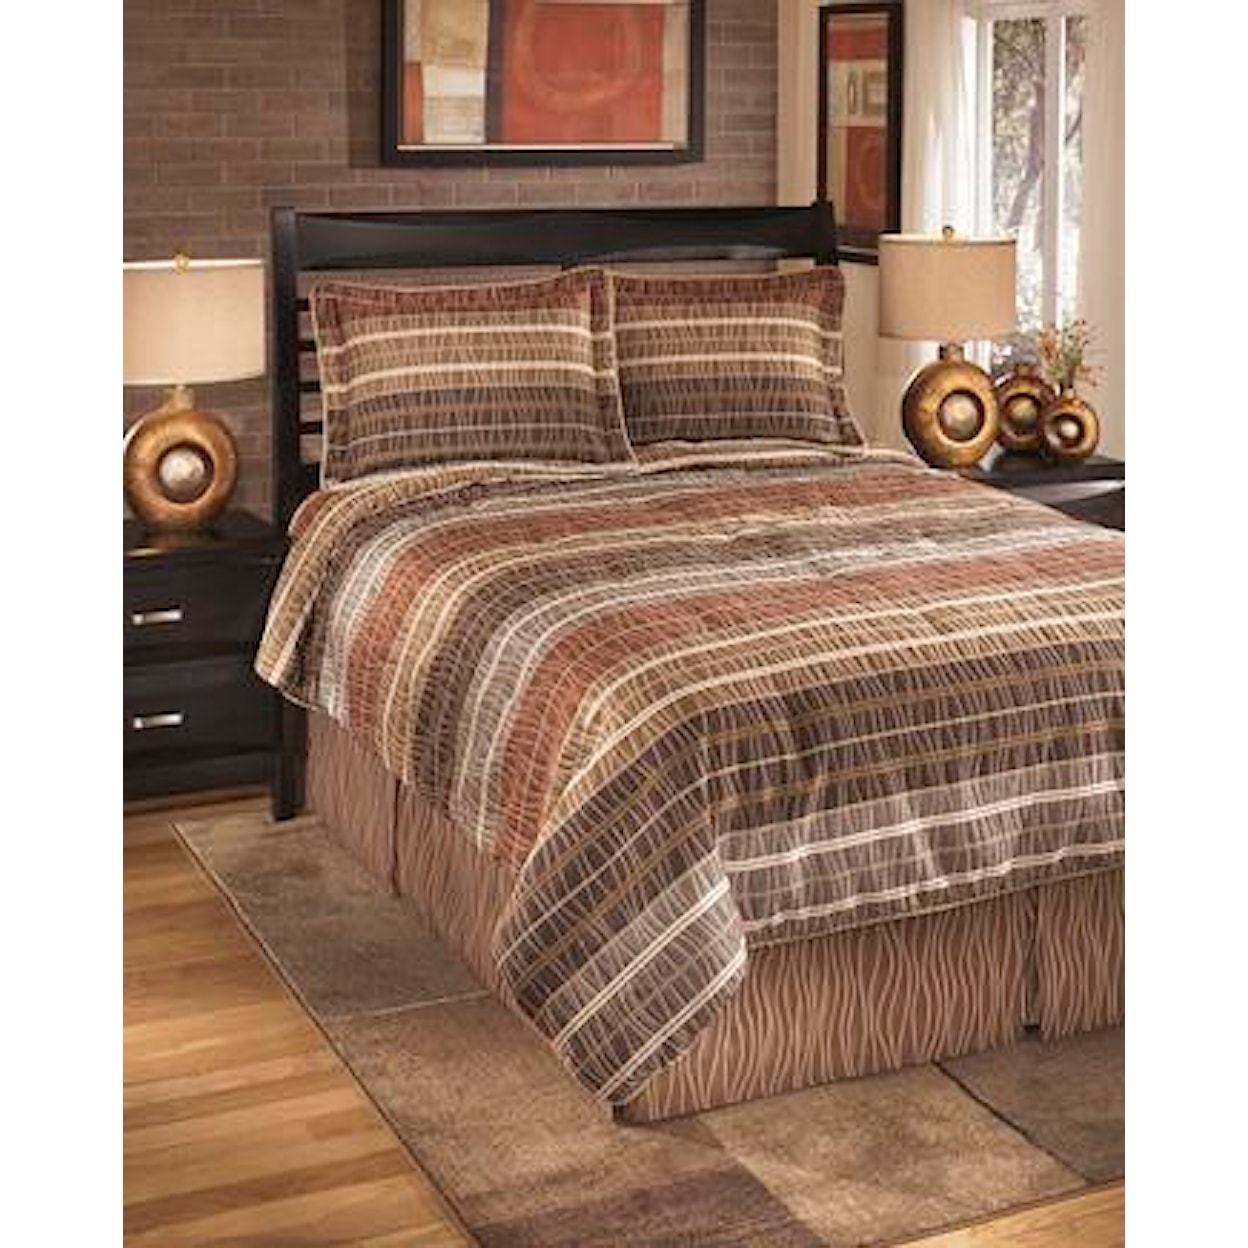 Signature Design by Ashley Furniture Bedding Sets Queen Wavelength Jewel Top of Bed Set